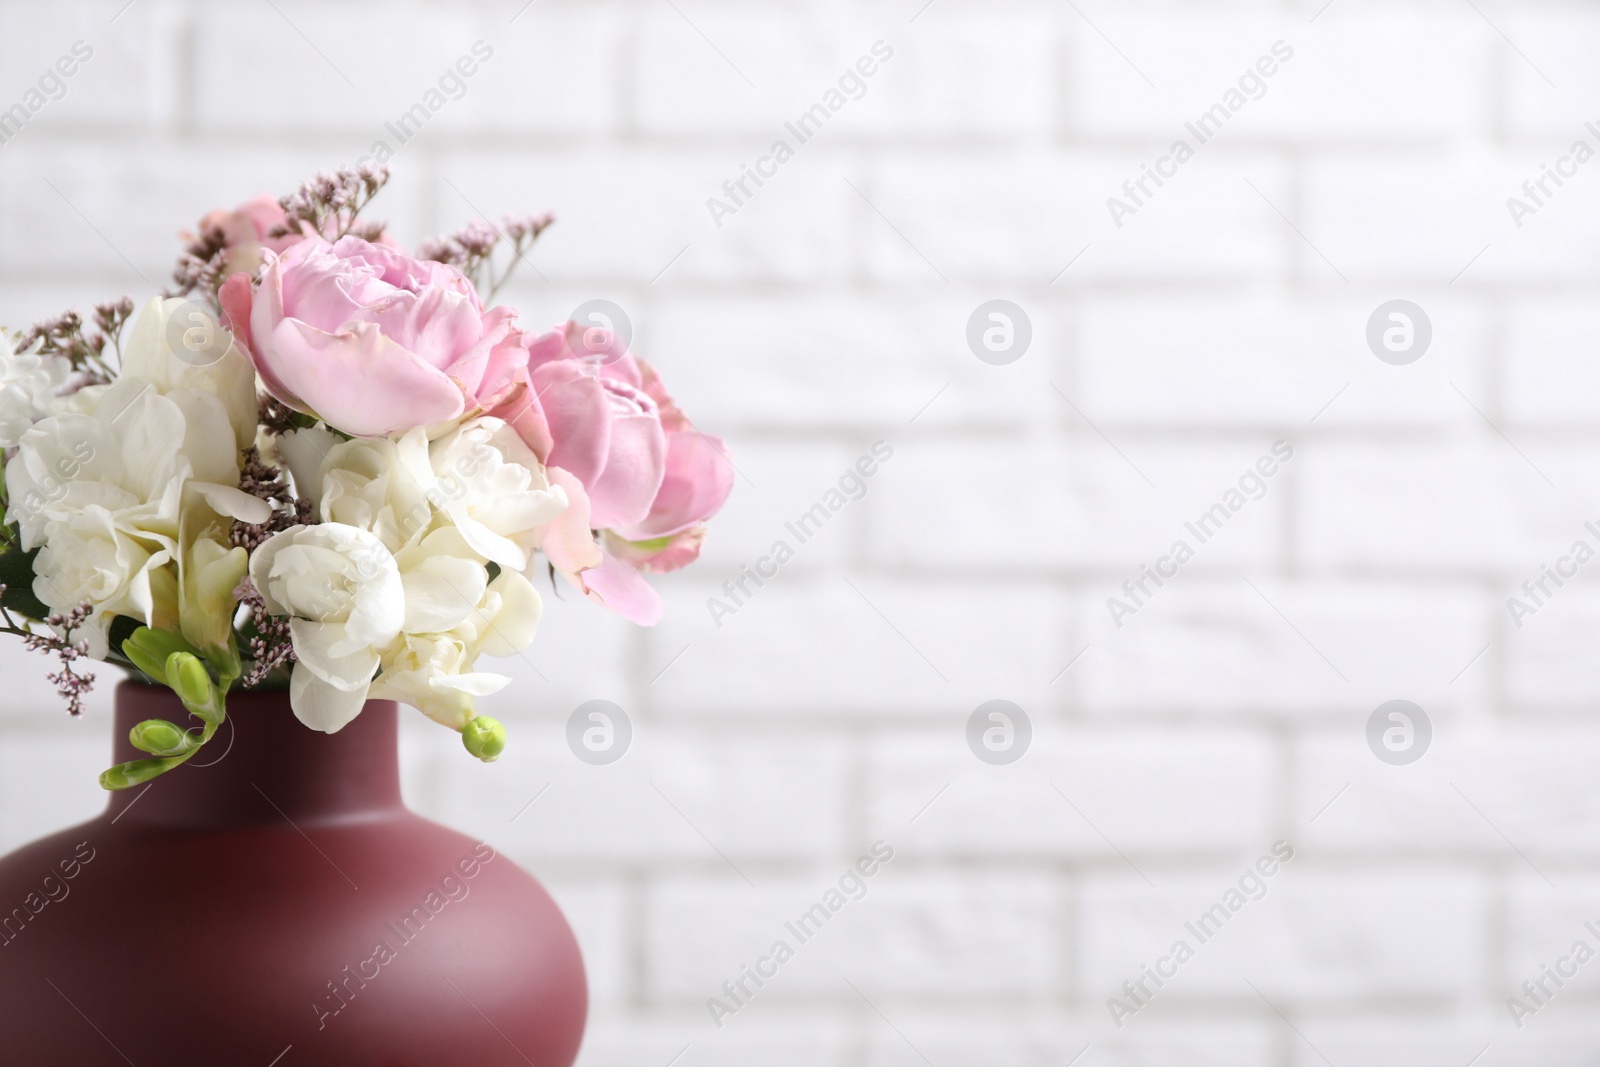 Photo of Beautiful bouquet with roses against white brick wall, closeup. Space for text